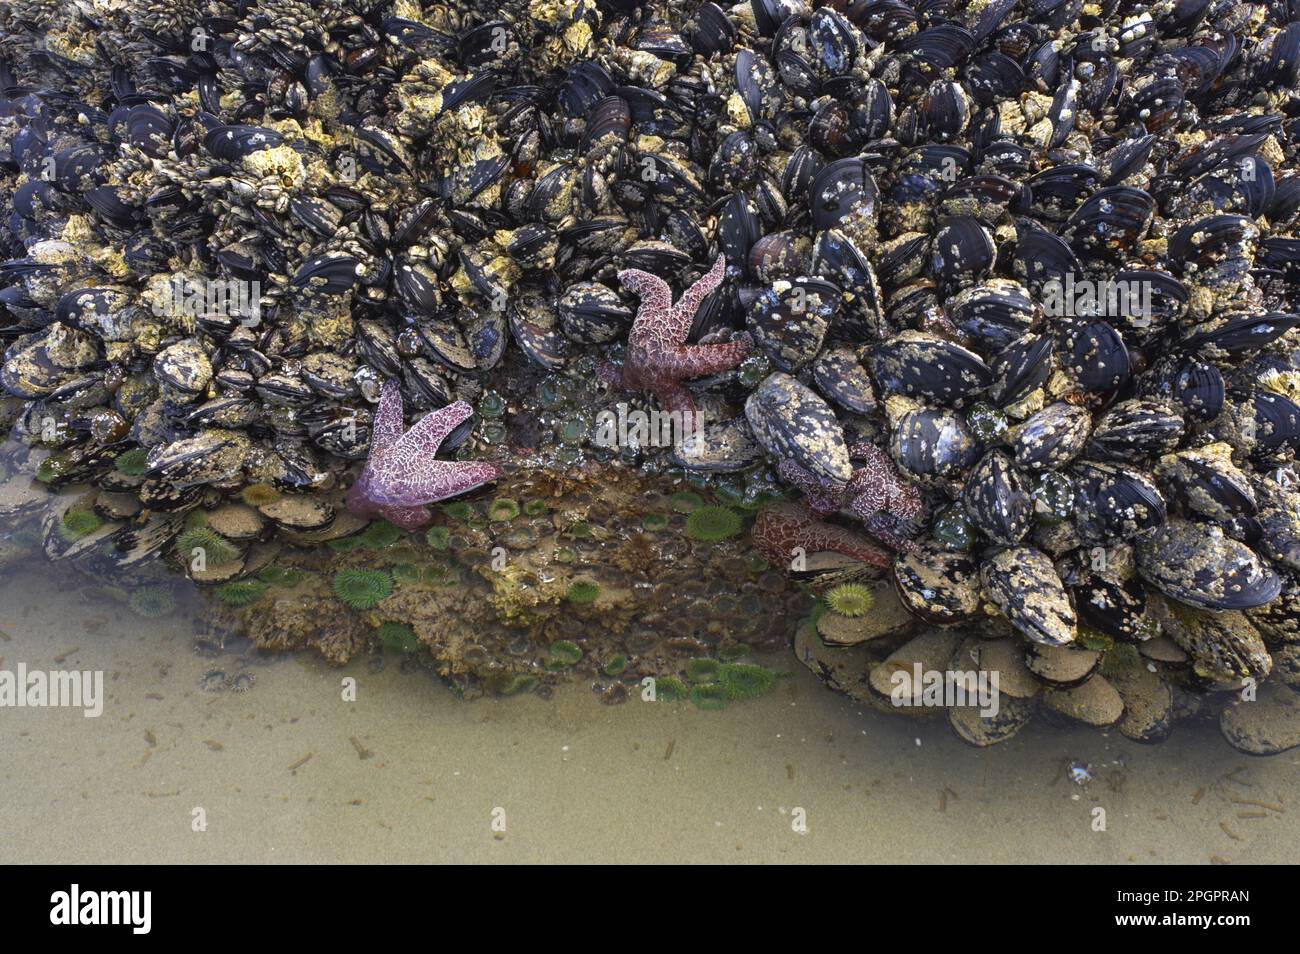 Ochre Seastar (Pisaster ochraceus) and Giant Green Anemone (Anthopleura xanthogrammica) exposed in mussel bed at low tide, Cannon Beach, Oregon (U.) Stock Photo